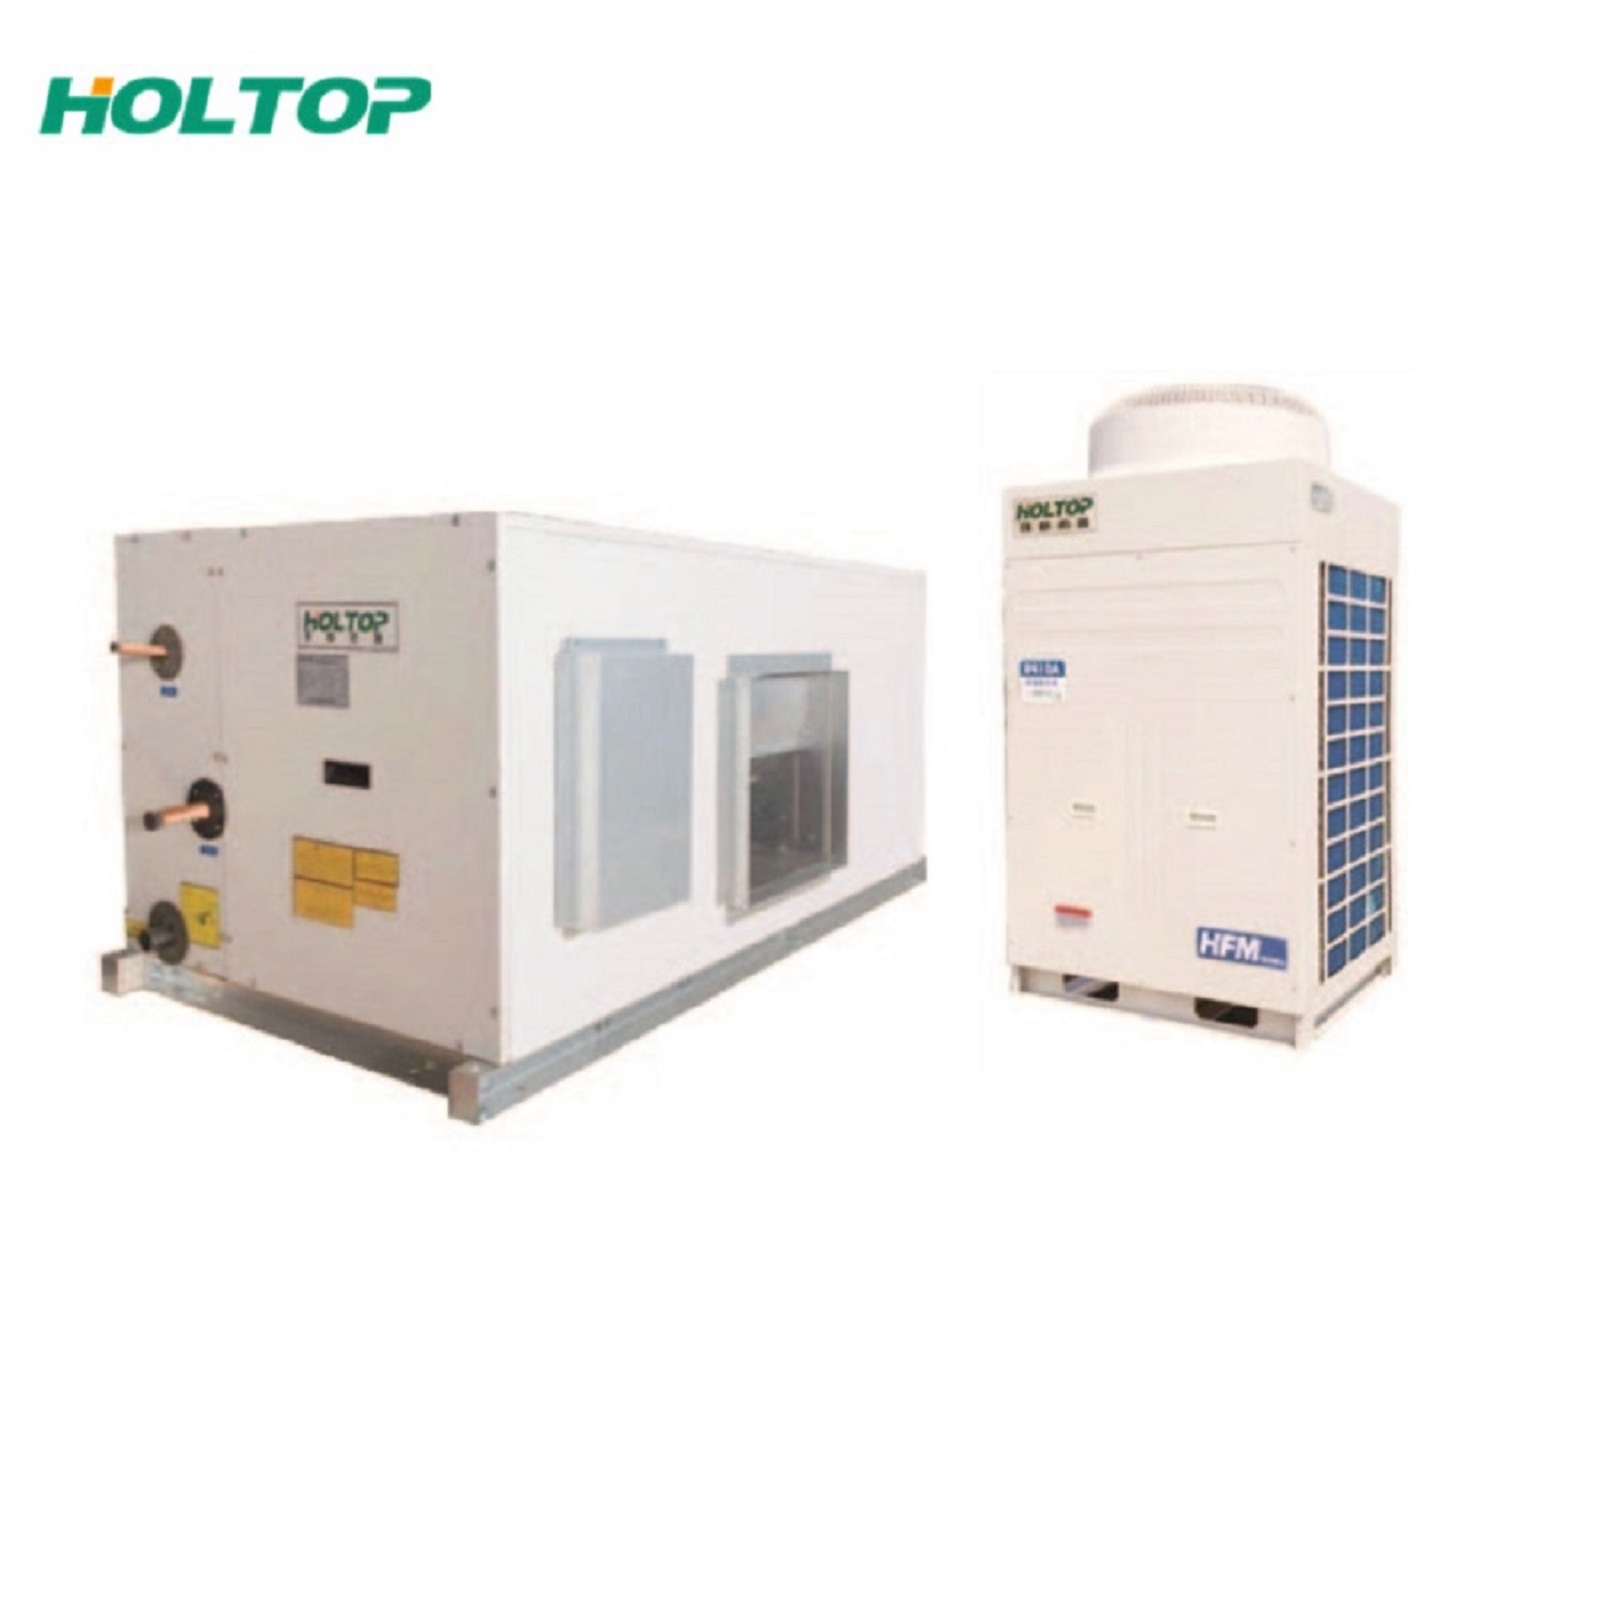 Holtop Suspended DX Coil Air Handling Units